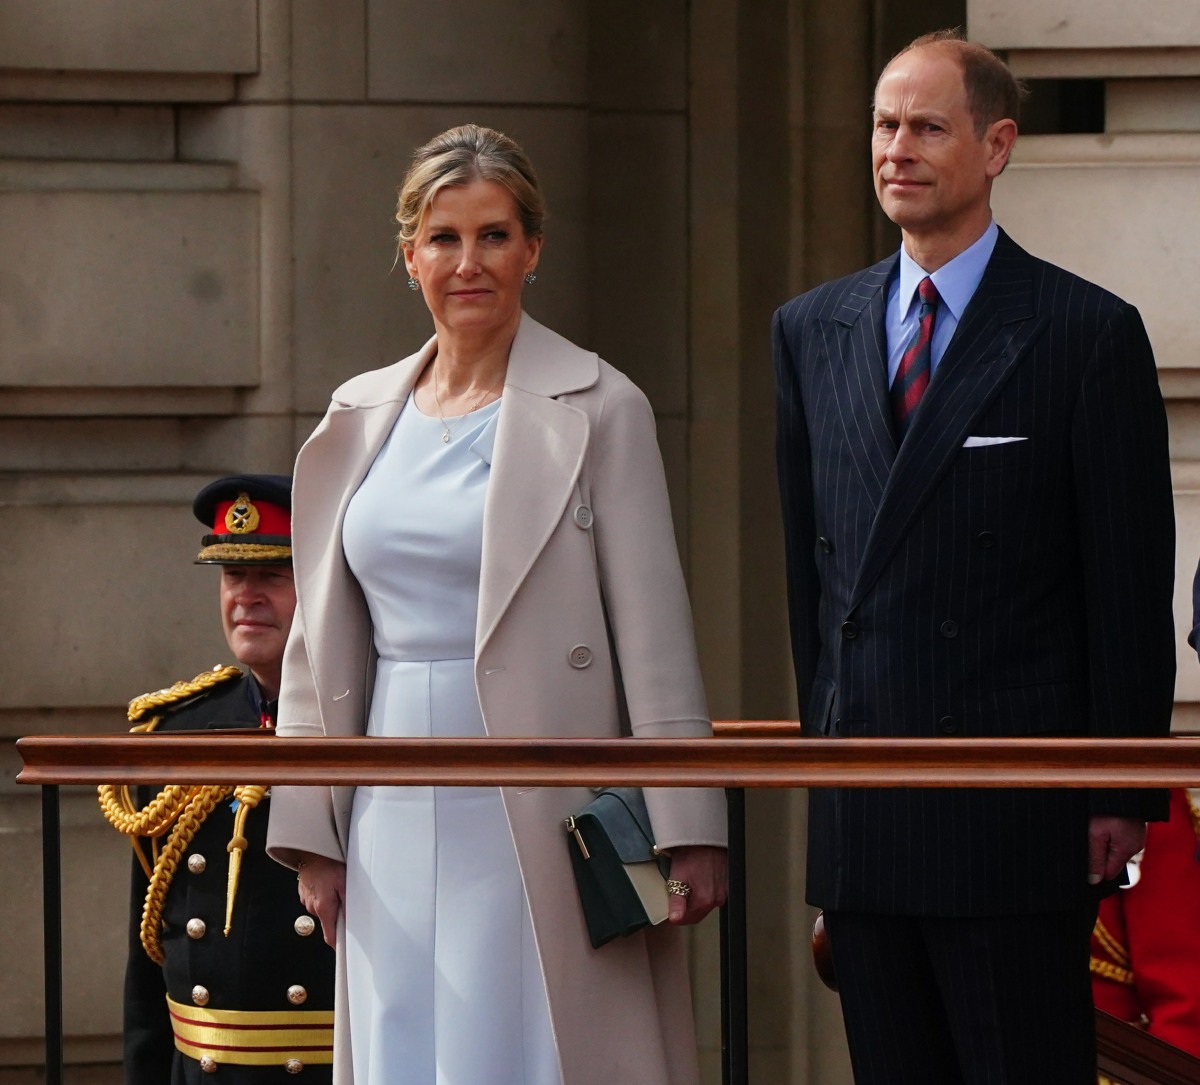 Prince Edward & Sophie, not Prince William, will attend the Anzac service this week